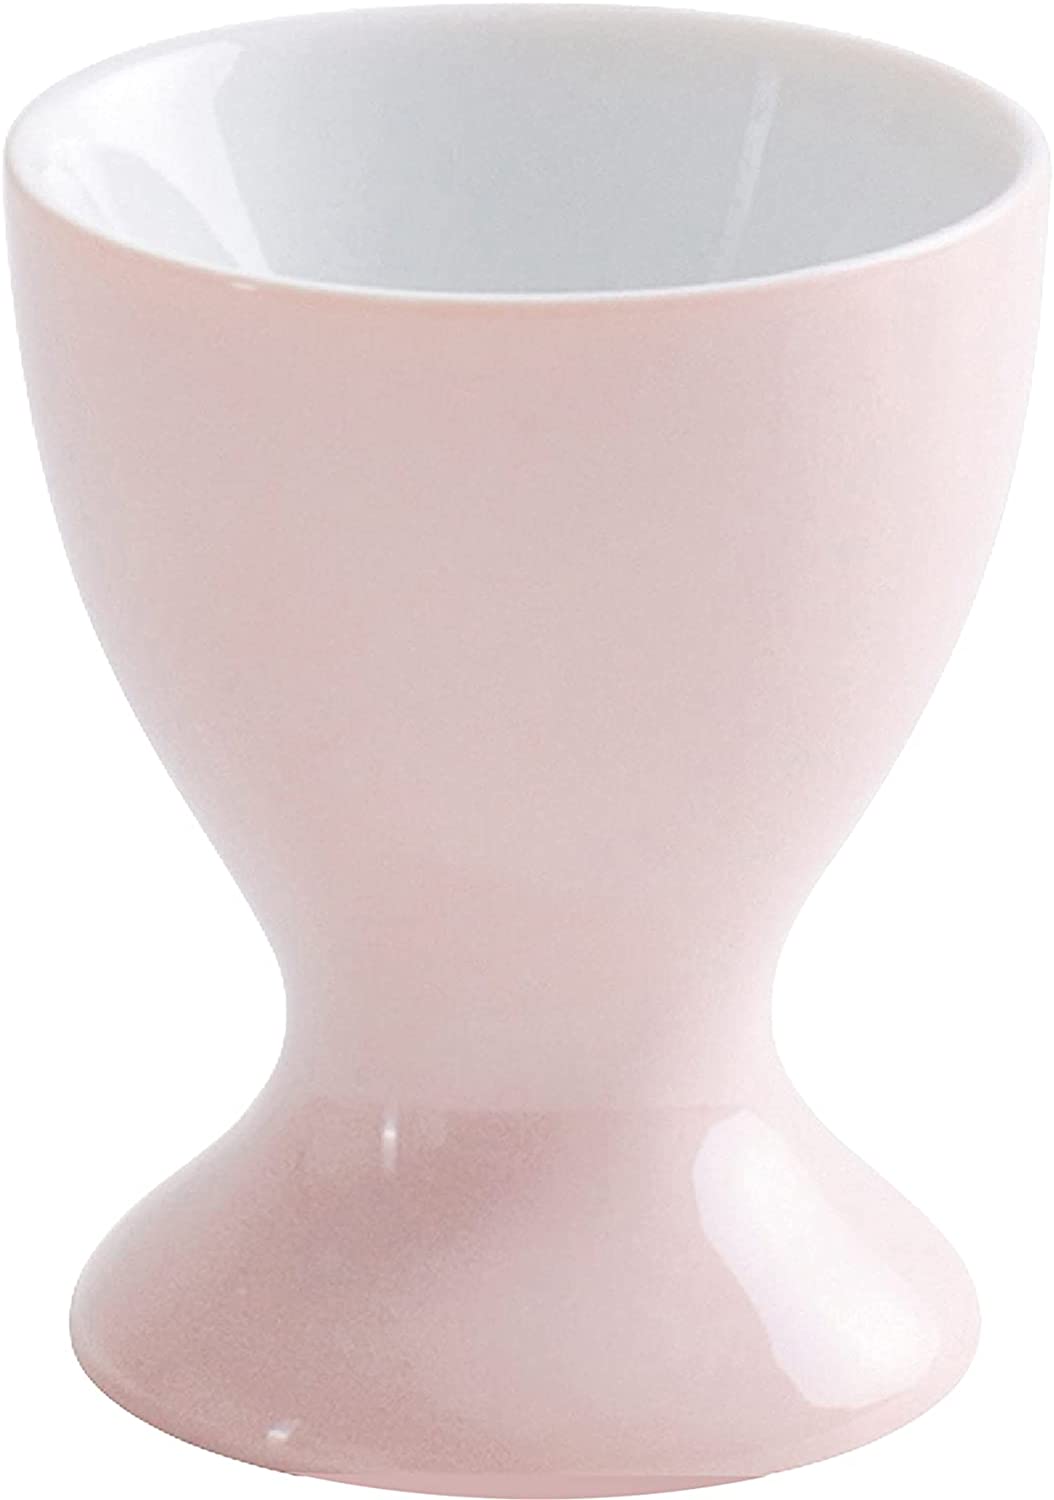 KAHLA 8.07-inch Pronto Egg Cup With Base, Egg Cup, Egg Cup, Porcelain, Pink, 207401 A69410X